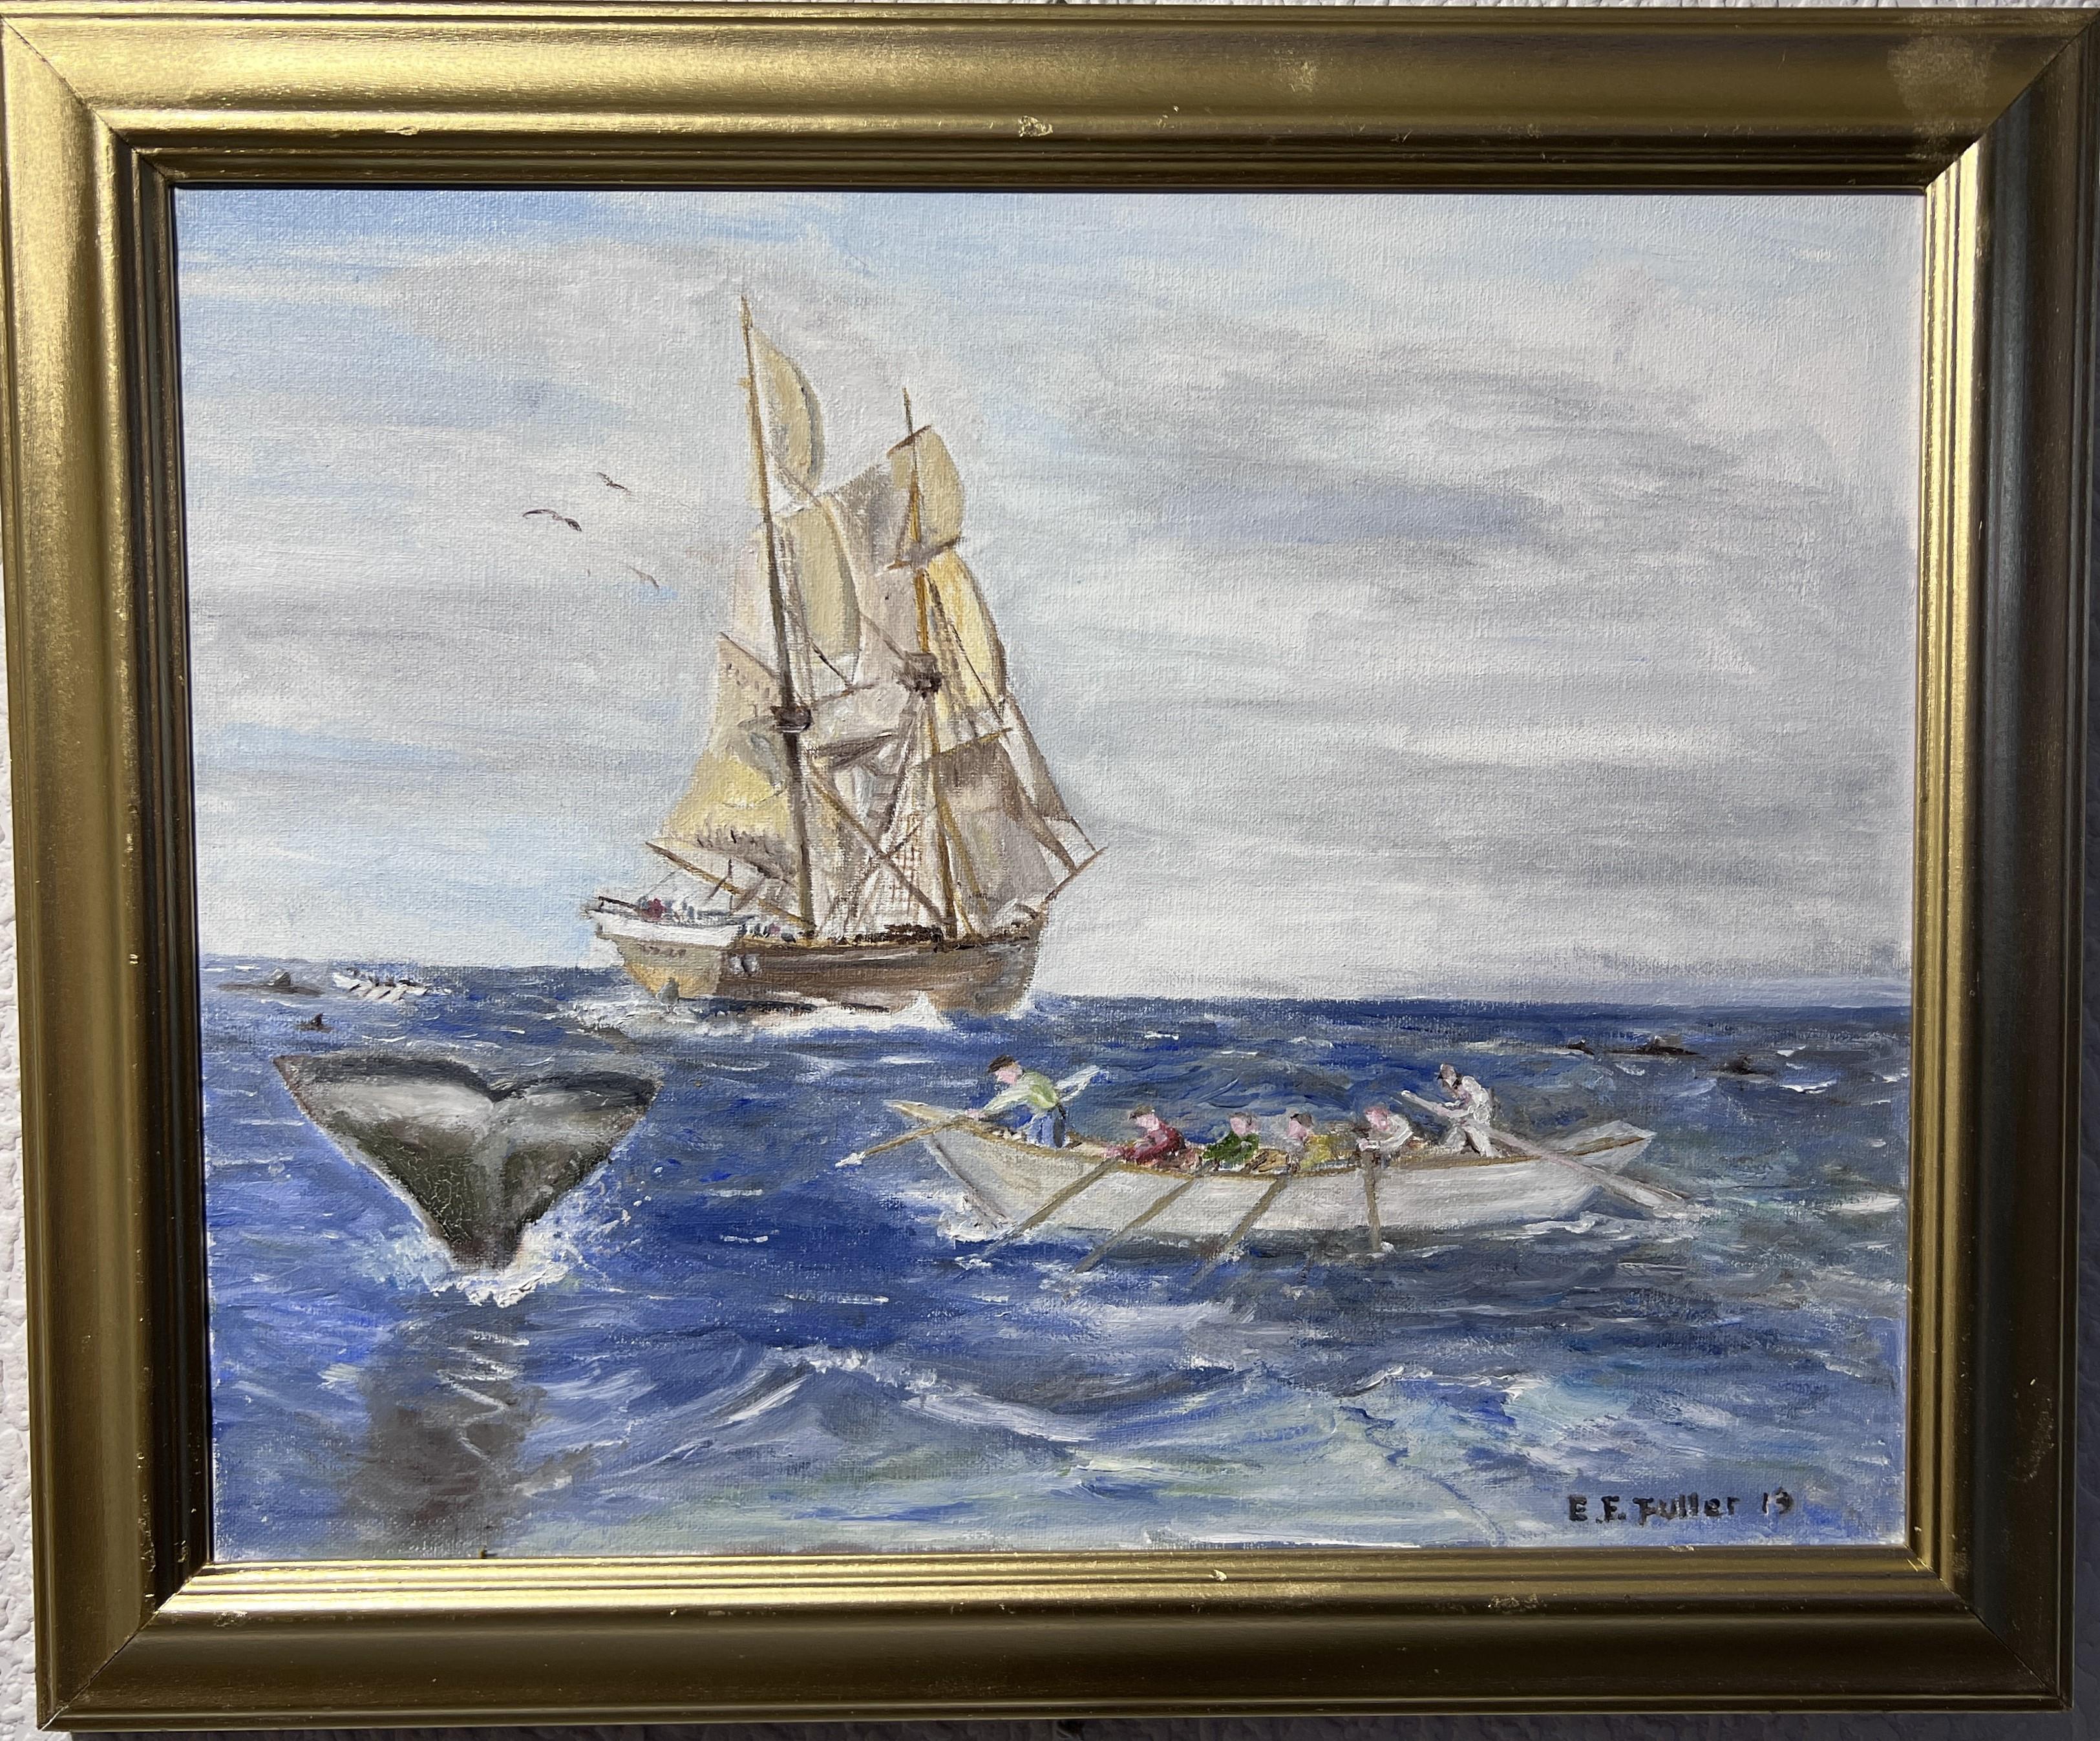 Up for sale is an original painting on canvas depicting a marine scene - a group of whalers in a boat hunting for a whale.  

Signed and dated in the lower right-hand corner E.F. Fuller '13. The painting is in good condition. Nicely framed. The